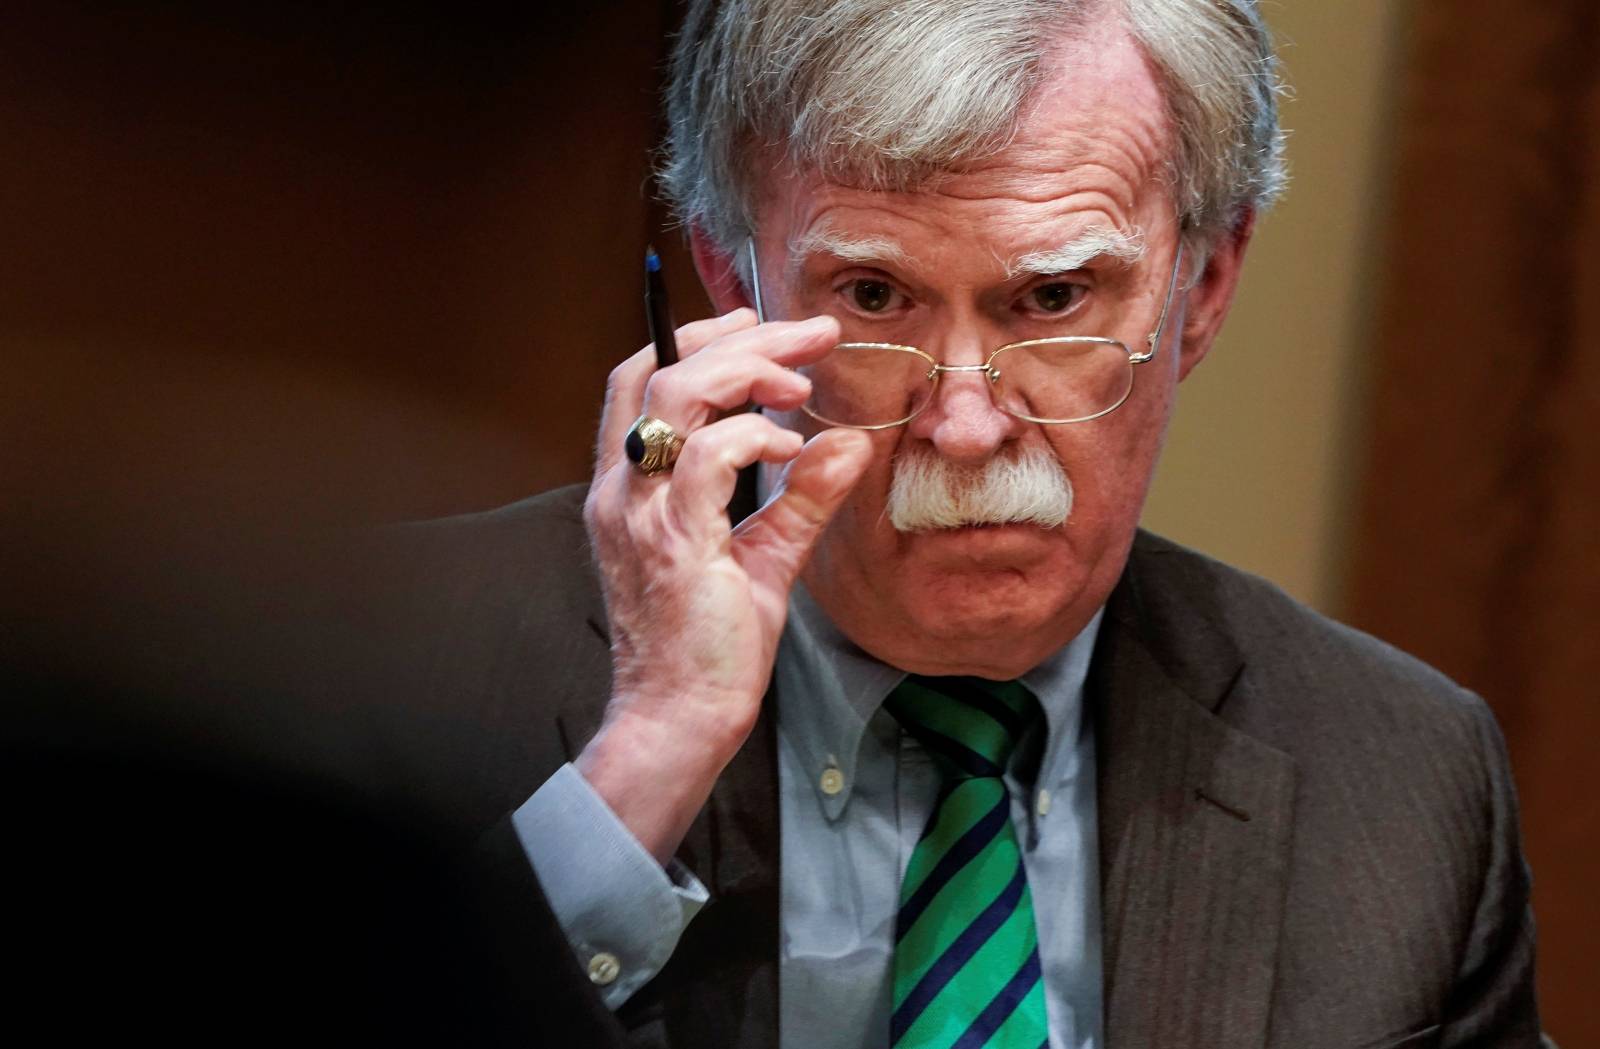 National Security Advisor Bolton listens as U.S. President Trump speaks while meeting with NATO Secretary General Stoltenberg at White House in Washington